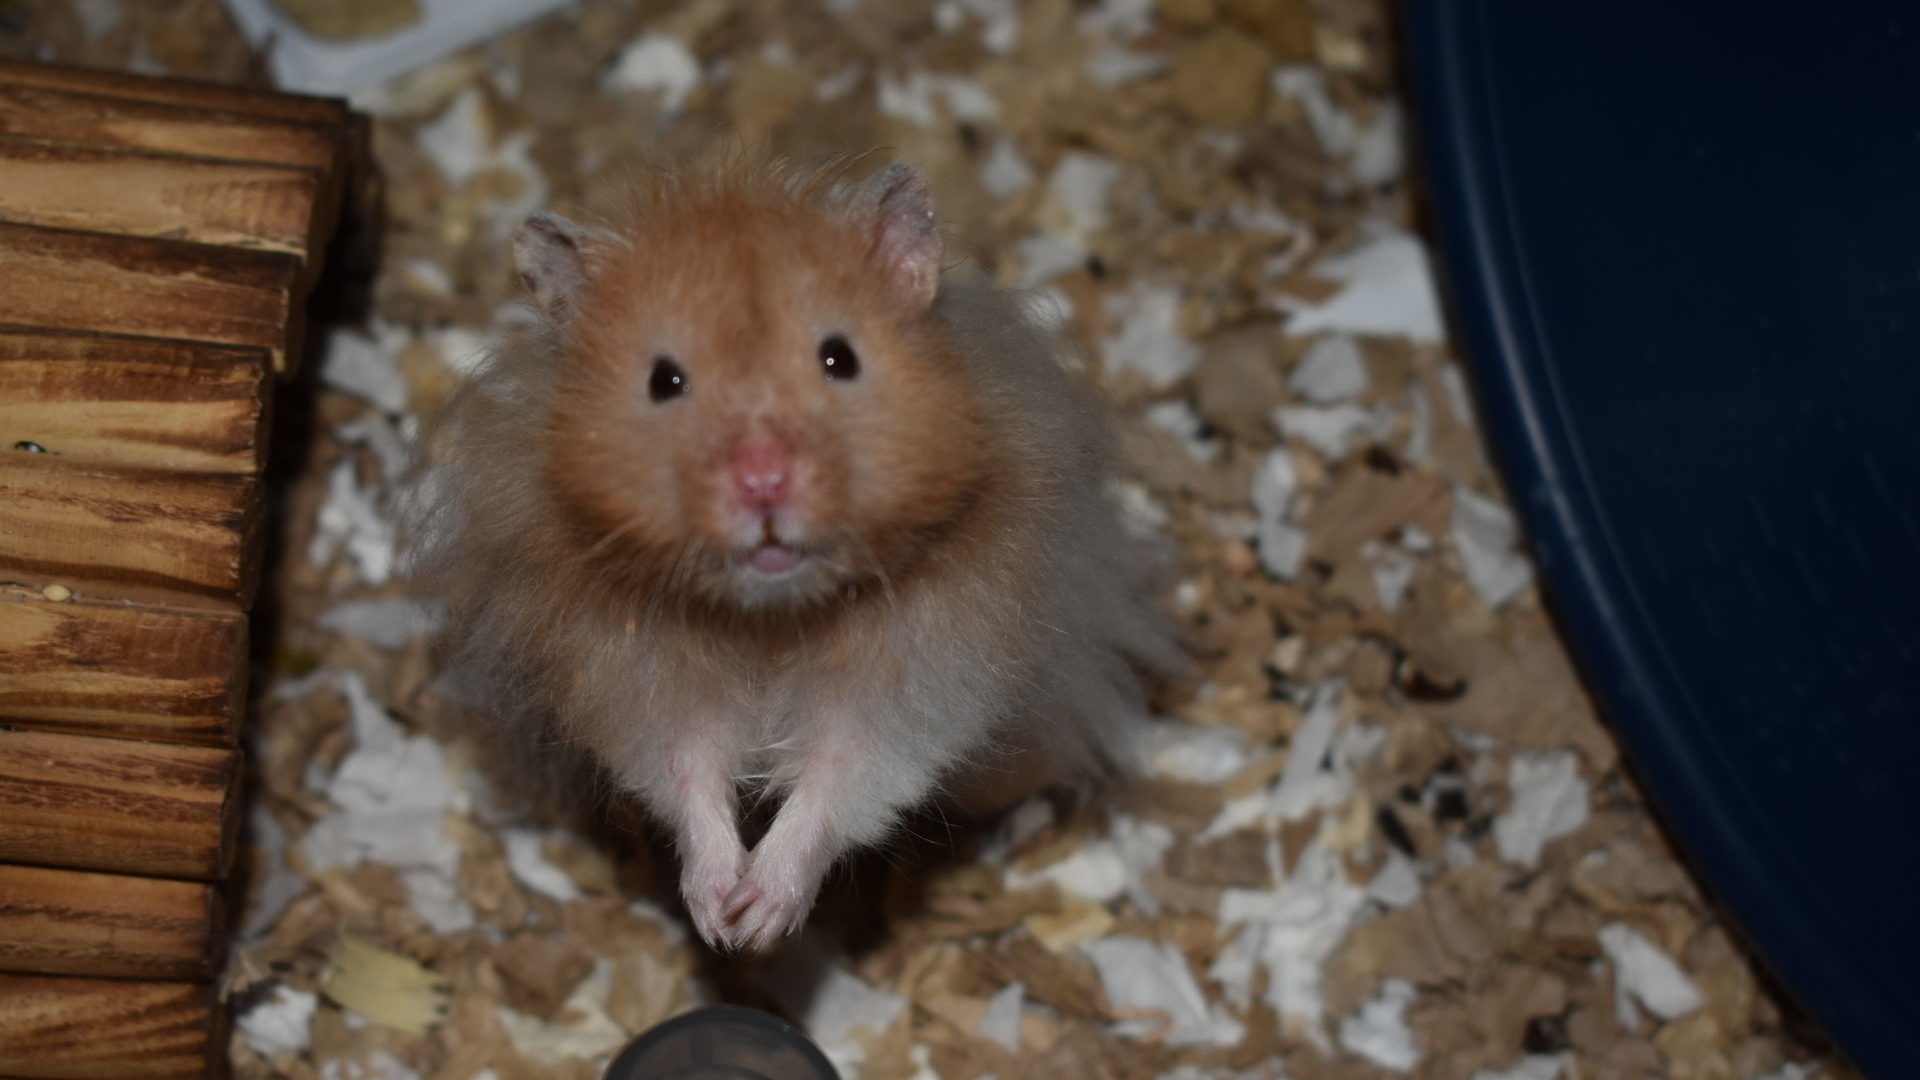 What Is the Typical Lifespan of a Hamster? (with pictures)